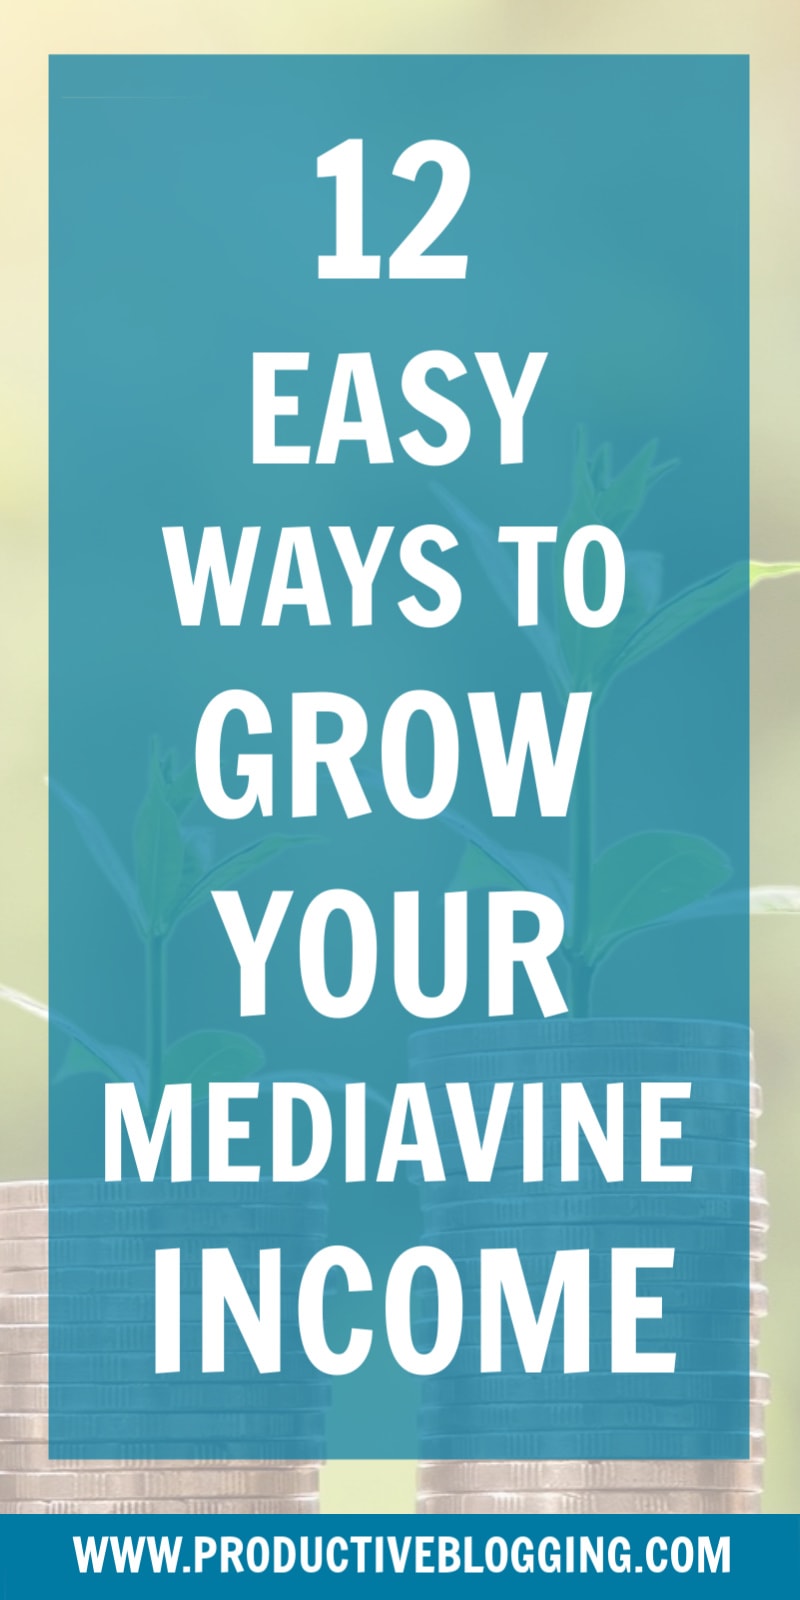 Ads are an easy way to make good money as a blogger. But are you maximising your ad revenue? Here are 12 easy ways to grow your Mediavine income… #ads #adincome adrevenue #mediavine #mediavineads #mediavineincome #makemoneyblogging #monetizeyourblog #passiveincome #blogtraffic #SEO #SEOtips #productiveblogging 